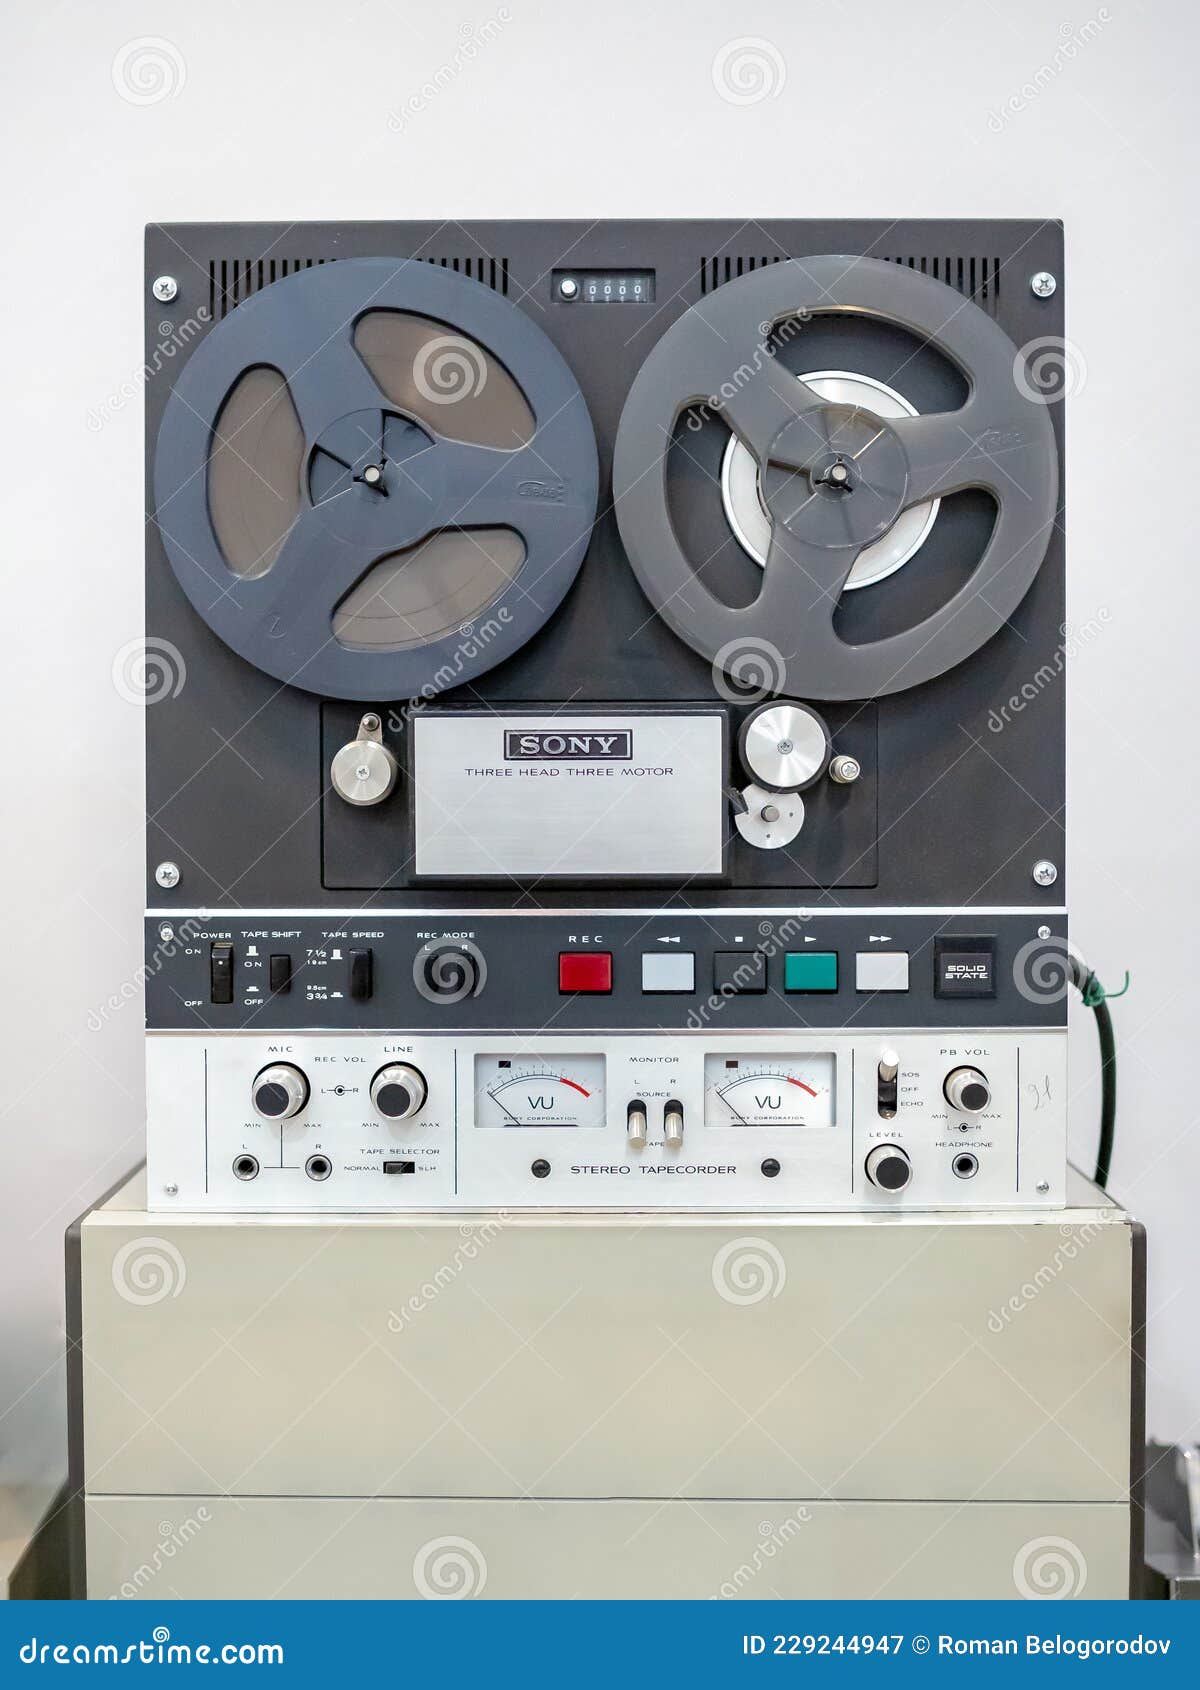 Vintage SONY Professional Reel To Reel Tape Recorder Editorial